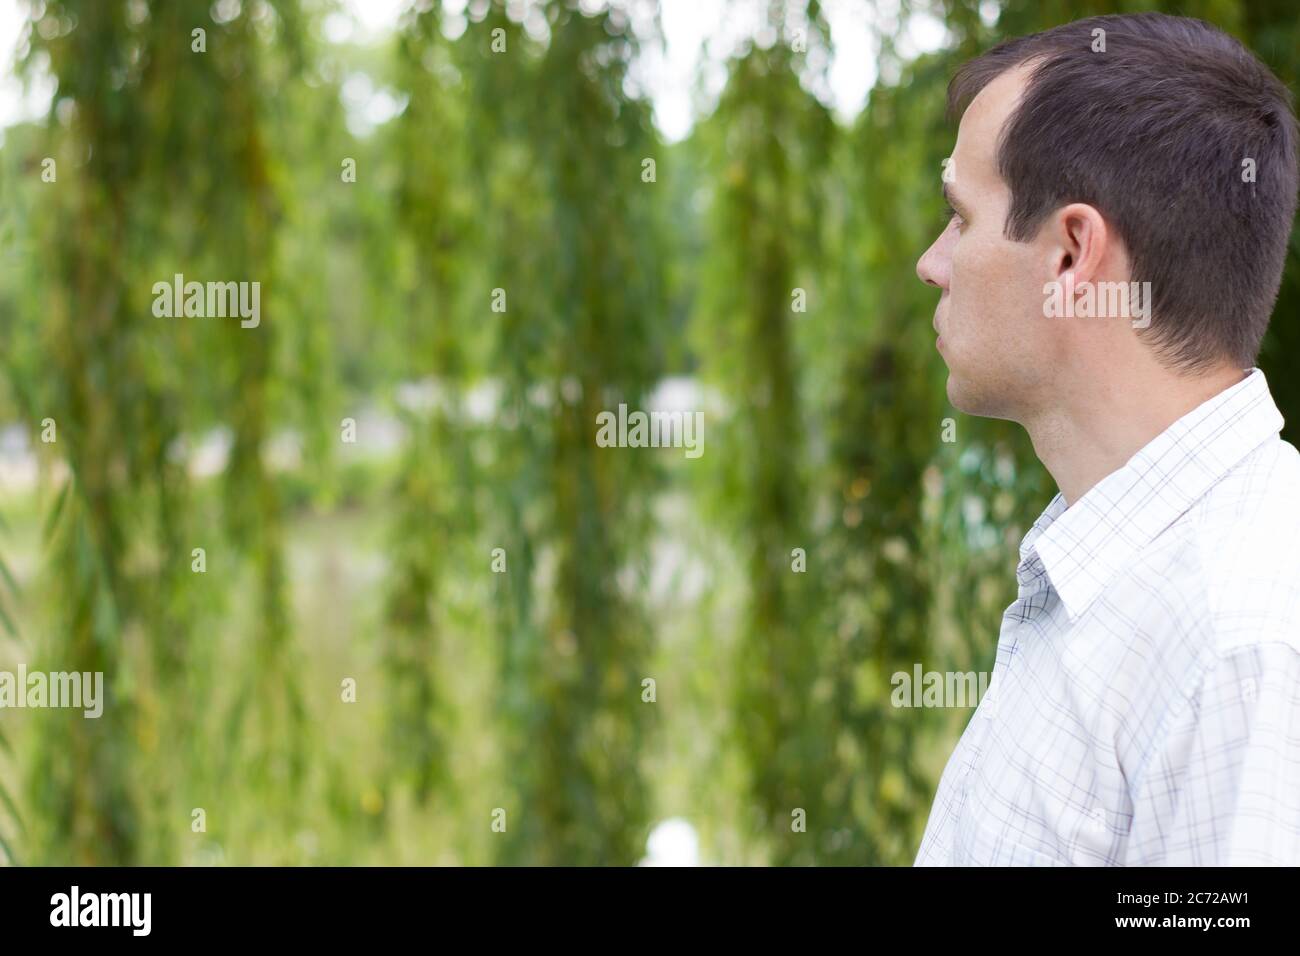 Portrait of a young man, view from the back on nature Stock Photo